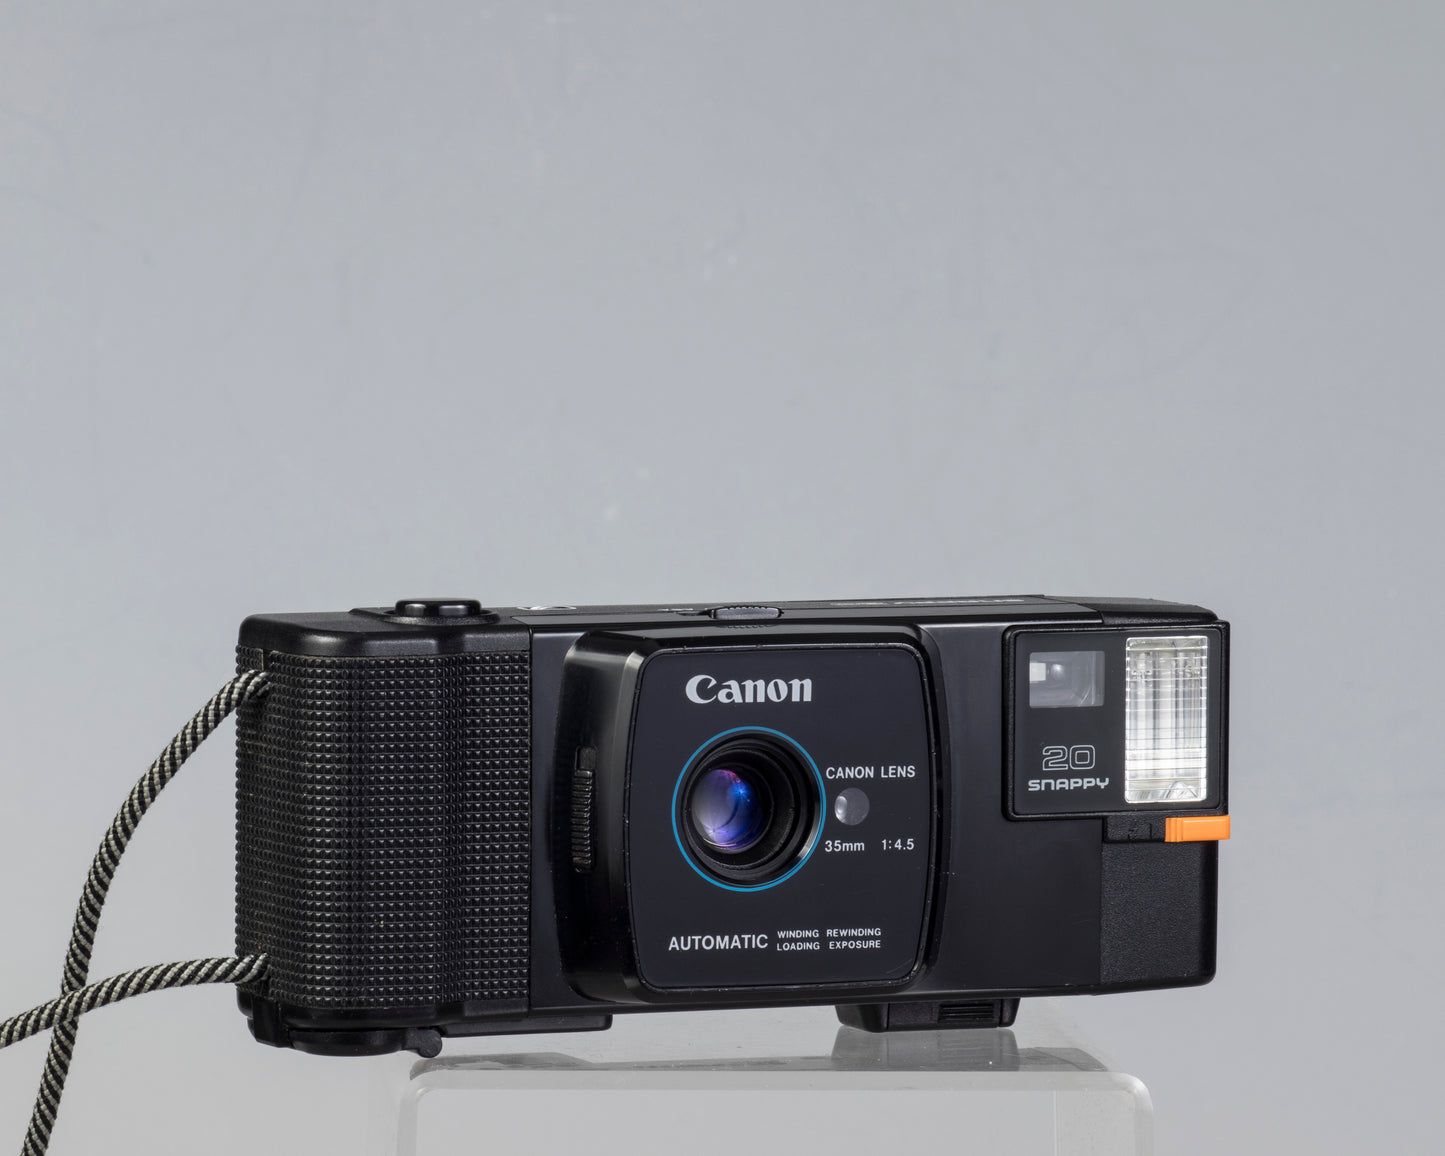 The Canon Snappy 20 35mm point-and-shoot camera